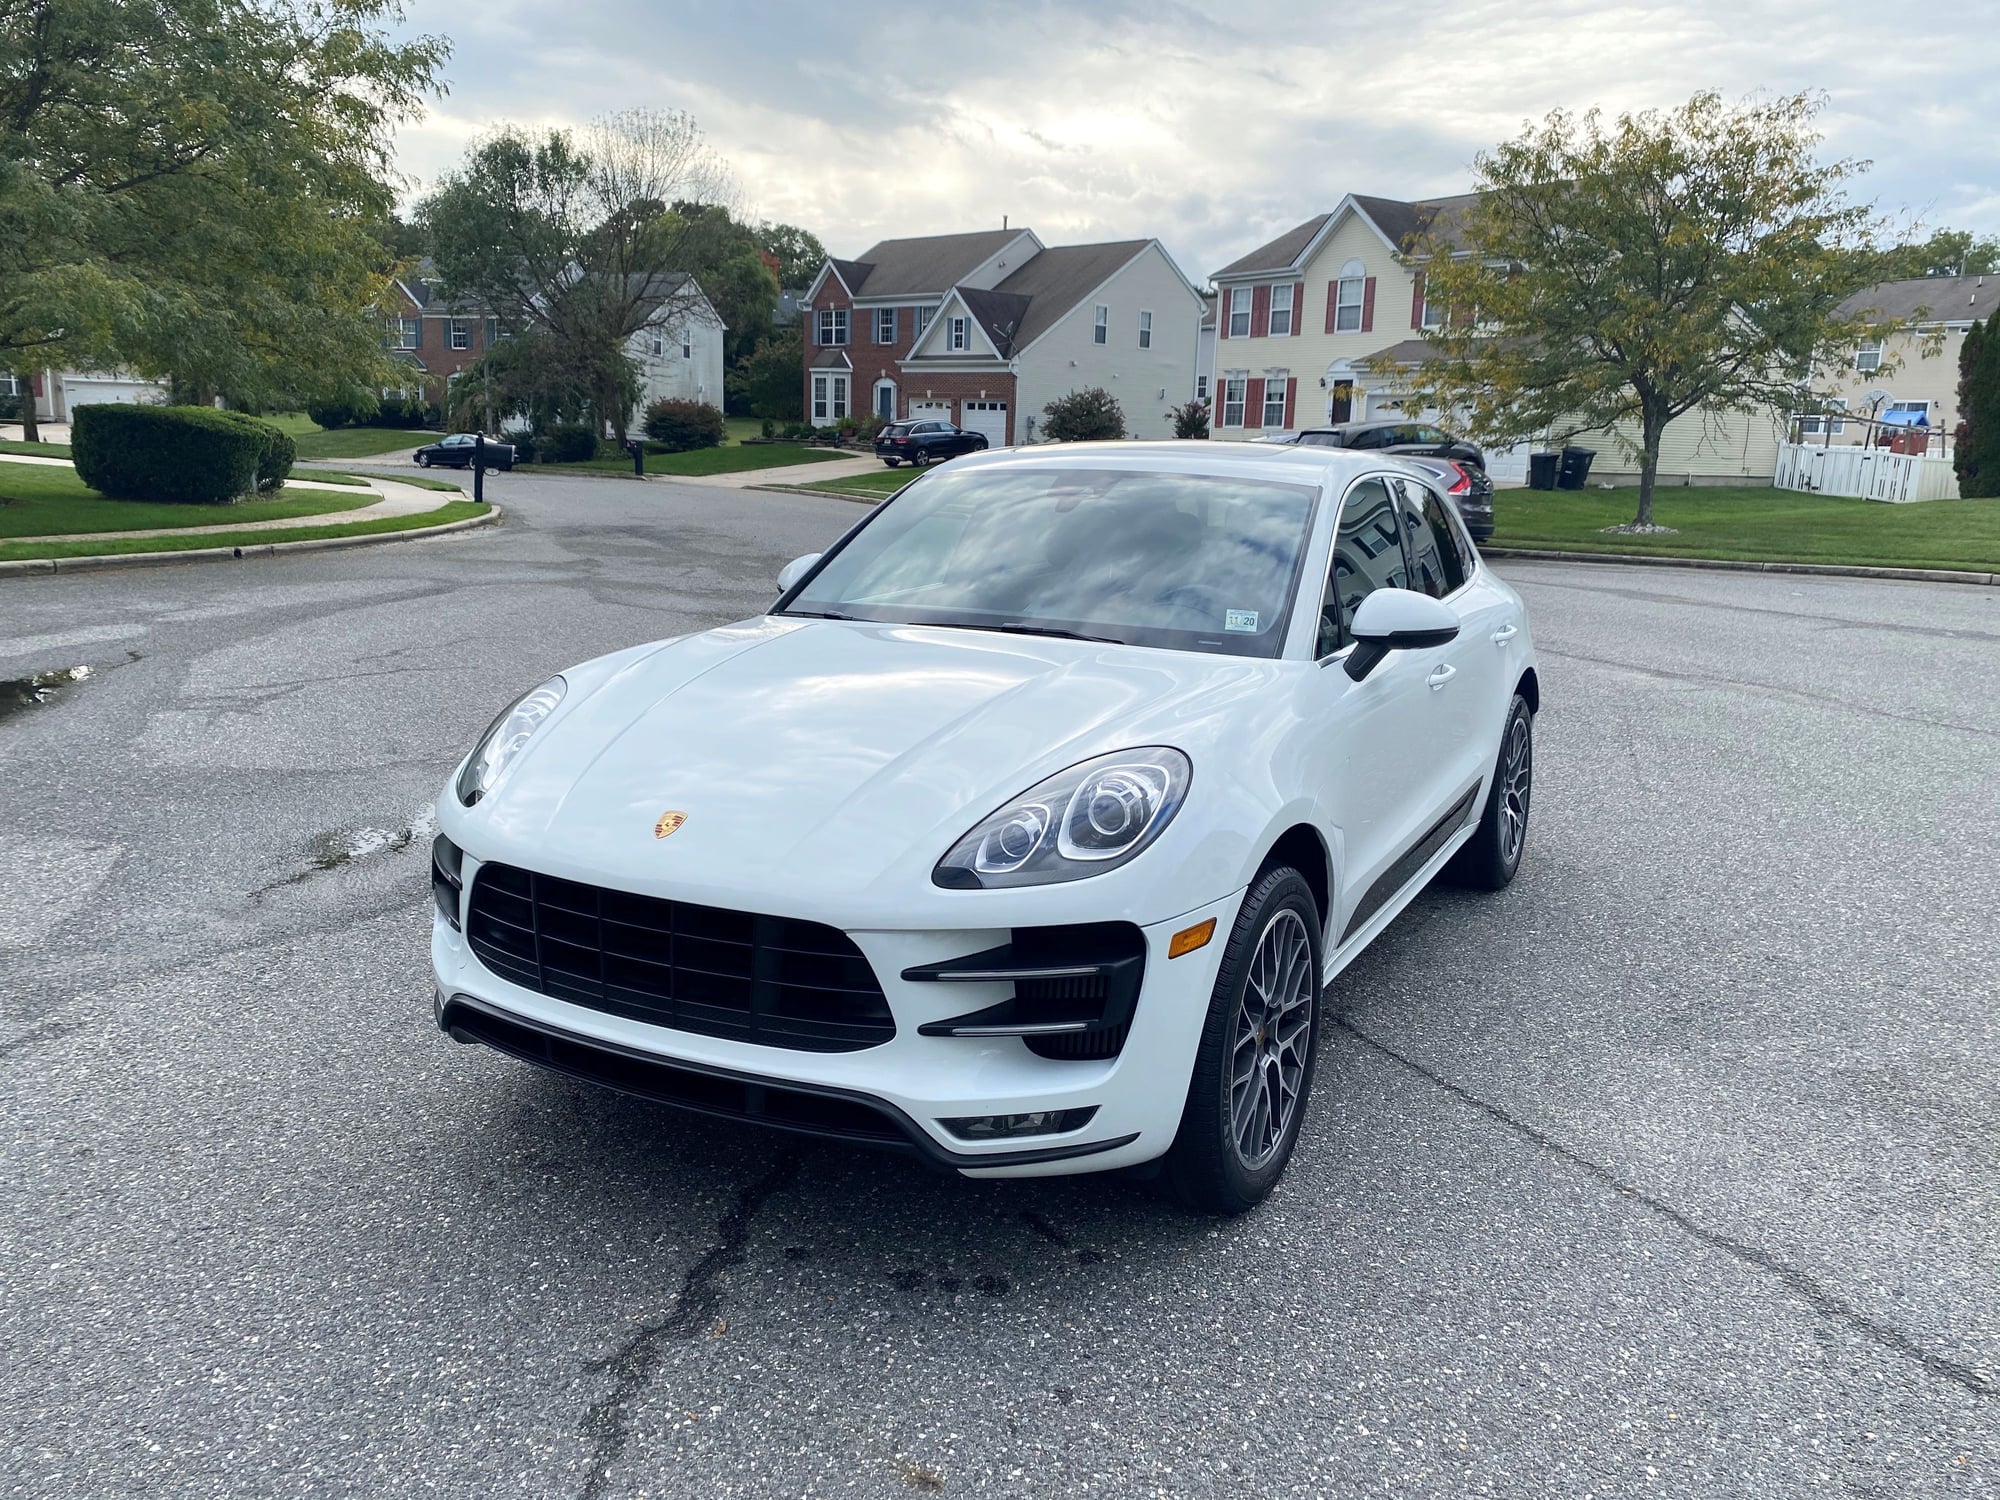 2015 Porsche Macan - 2015 Porsche Macan Turbo White with Black/Garnet Red, Air Suspension and Sport Chrono - Used - VIN WPA1AF2A55FLB9435 - 76,138 Miles - 6 cyl - 4WD - Automatic - SUV - White - Deptford, NJ 08096, United States